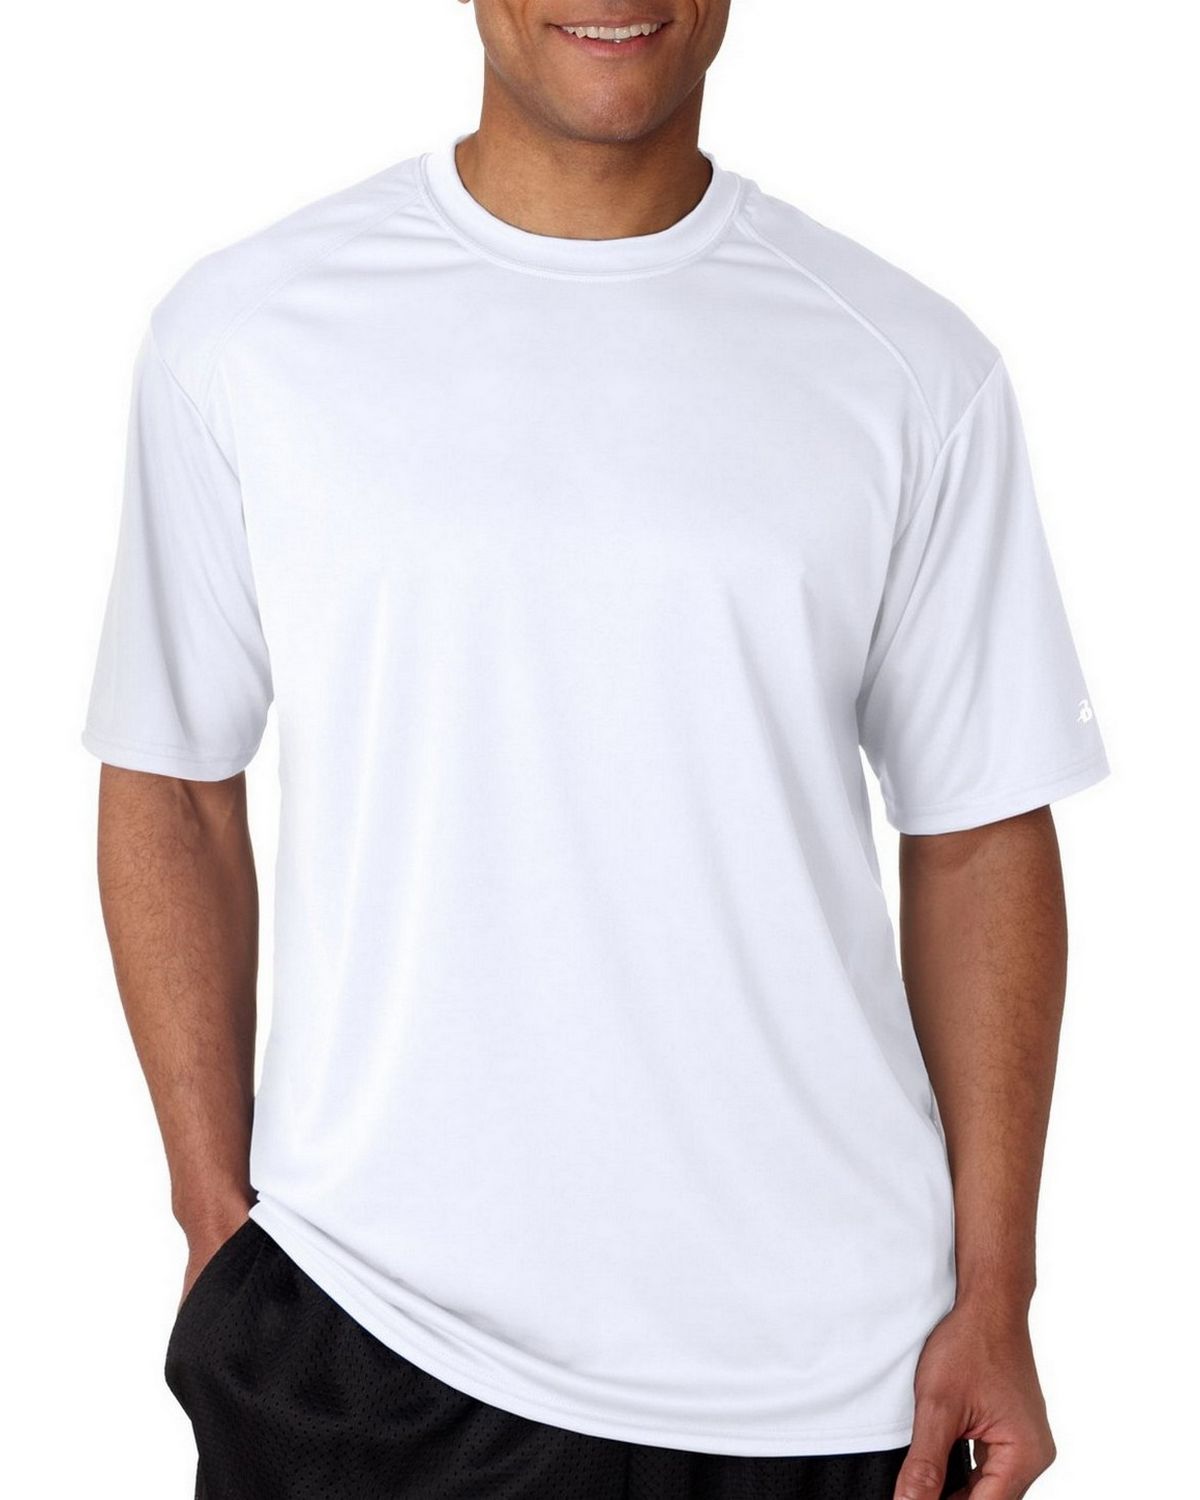 Size Chart For Hanes 4820 Cool Dri T Shirt